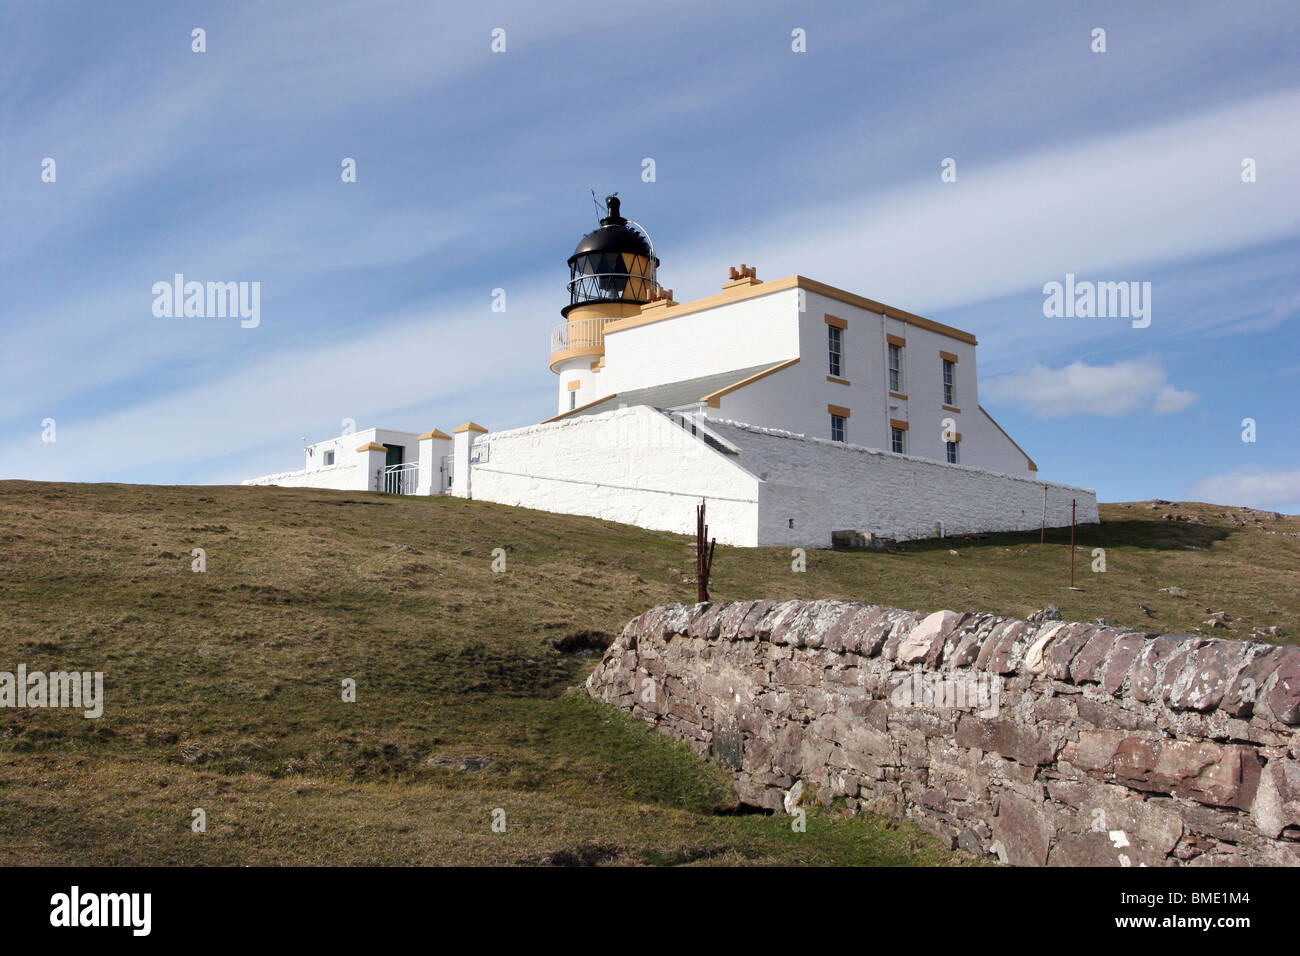 Stoer Head Lighthouse Banque D'Images